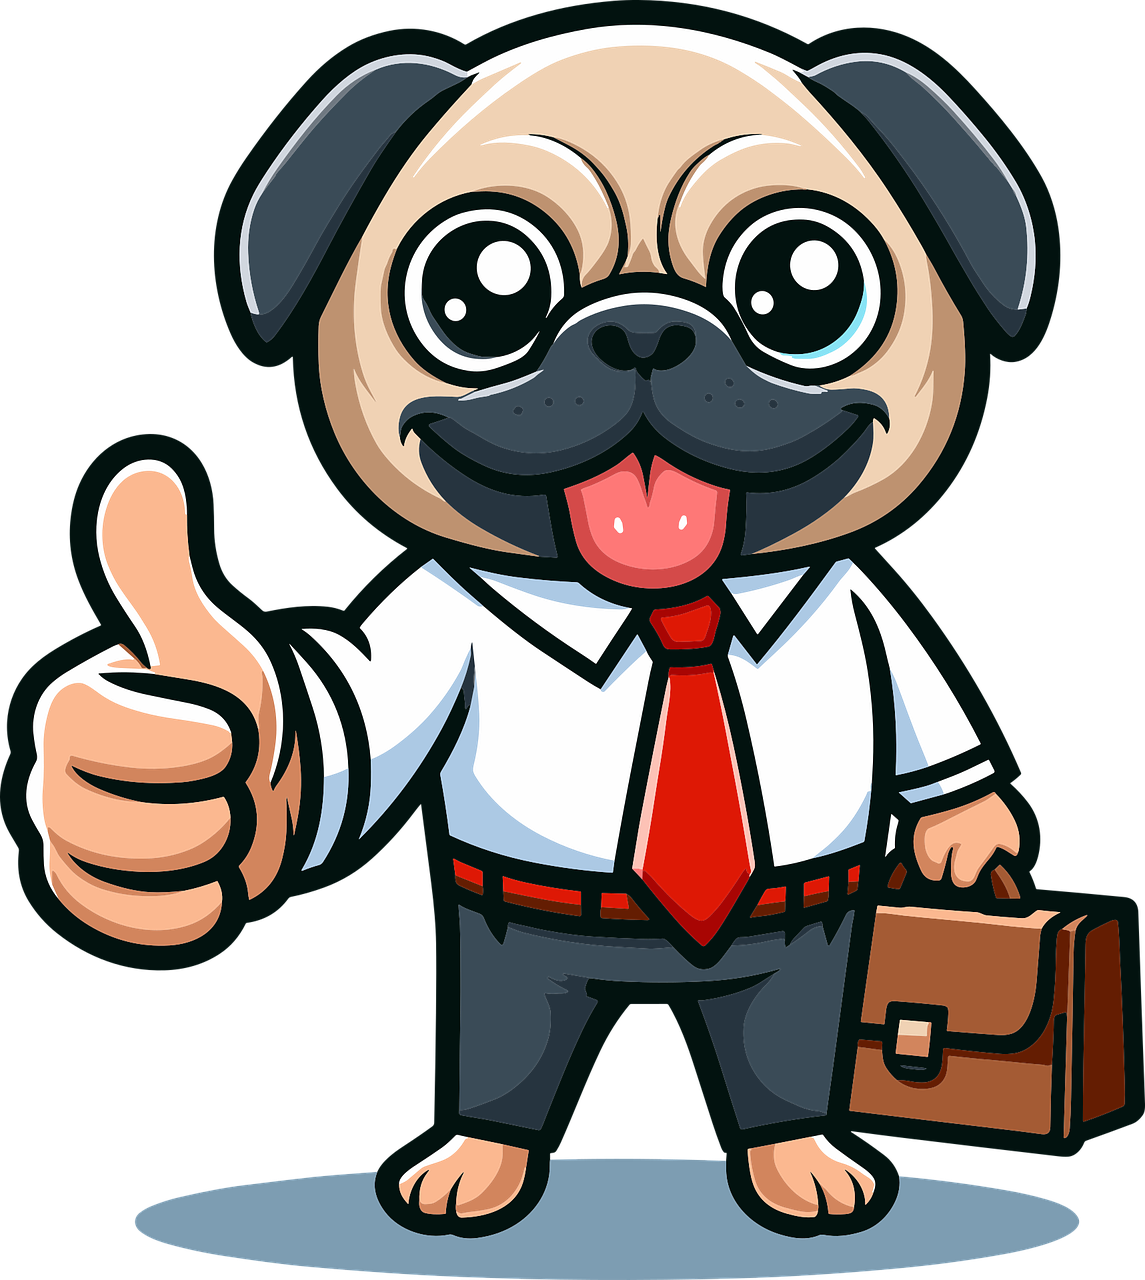 A cartoon dog wearing a suit and holding a briefcase smiling and holding a thumbs up